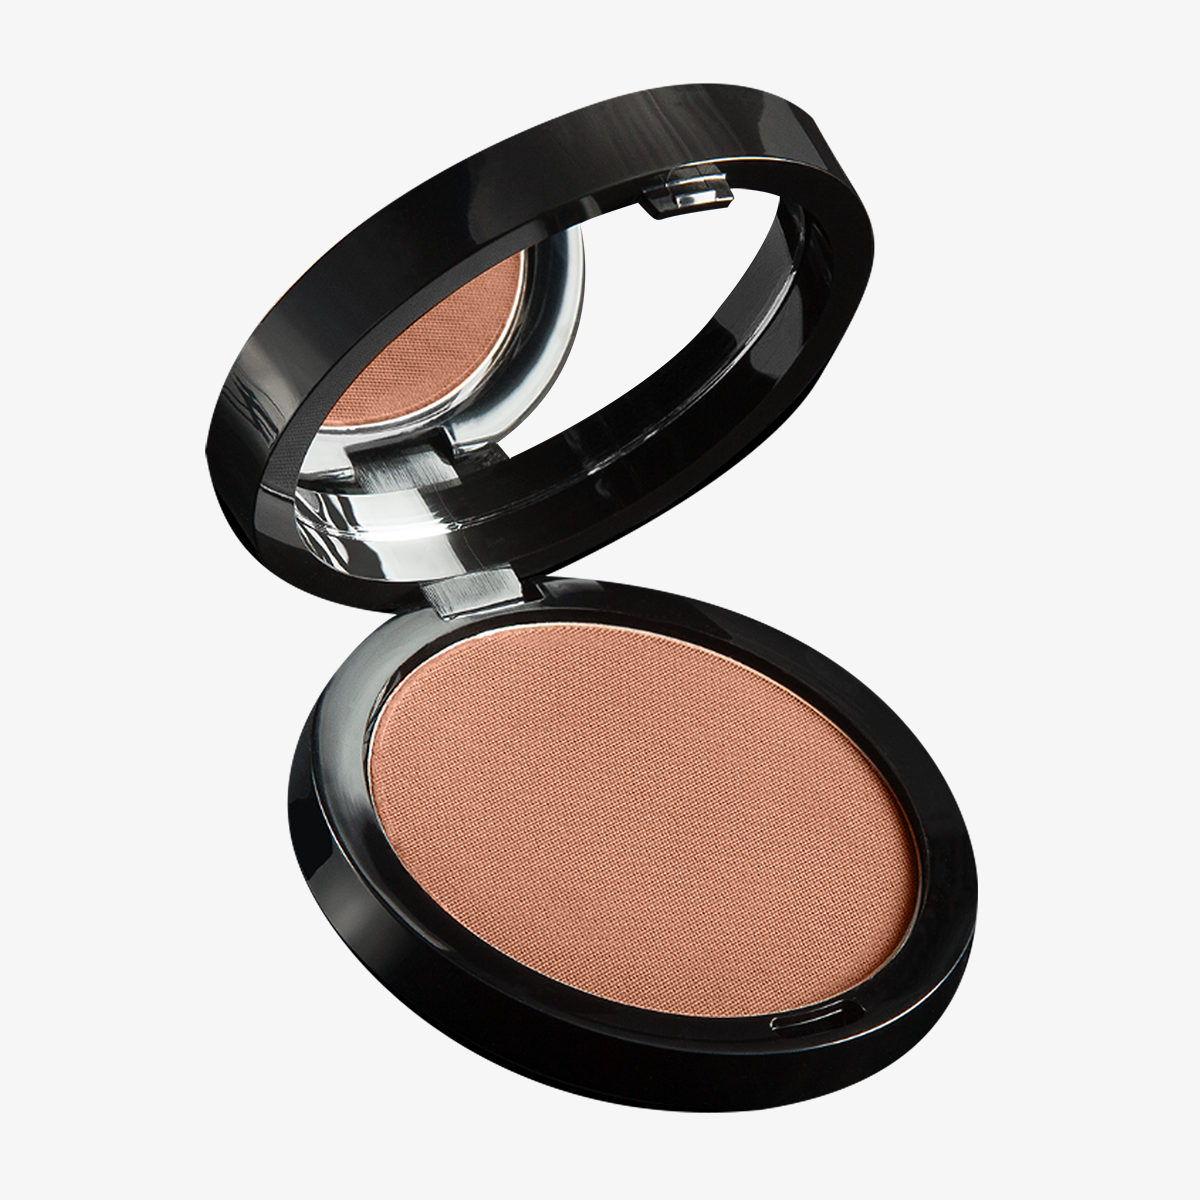 Achieve the golden beauty post-vacation aesthetic by amplifying a warm glow with triple-milled powder that delivers a long-lasting finish. WHAT IS IT Enhance skin with a radiating healthy glow with a sheer, buildable bronzer. - Ultra-lightweight sheer powder - Pearlized finish provides a smooth, velvety texture - Sheer formula blends effortlessly for a sun-filled glow